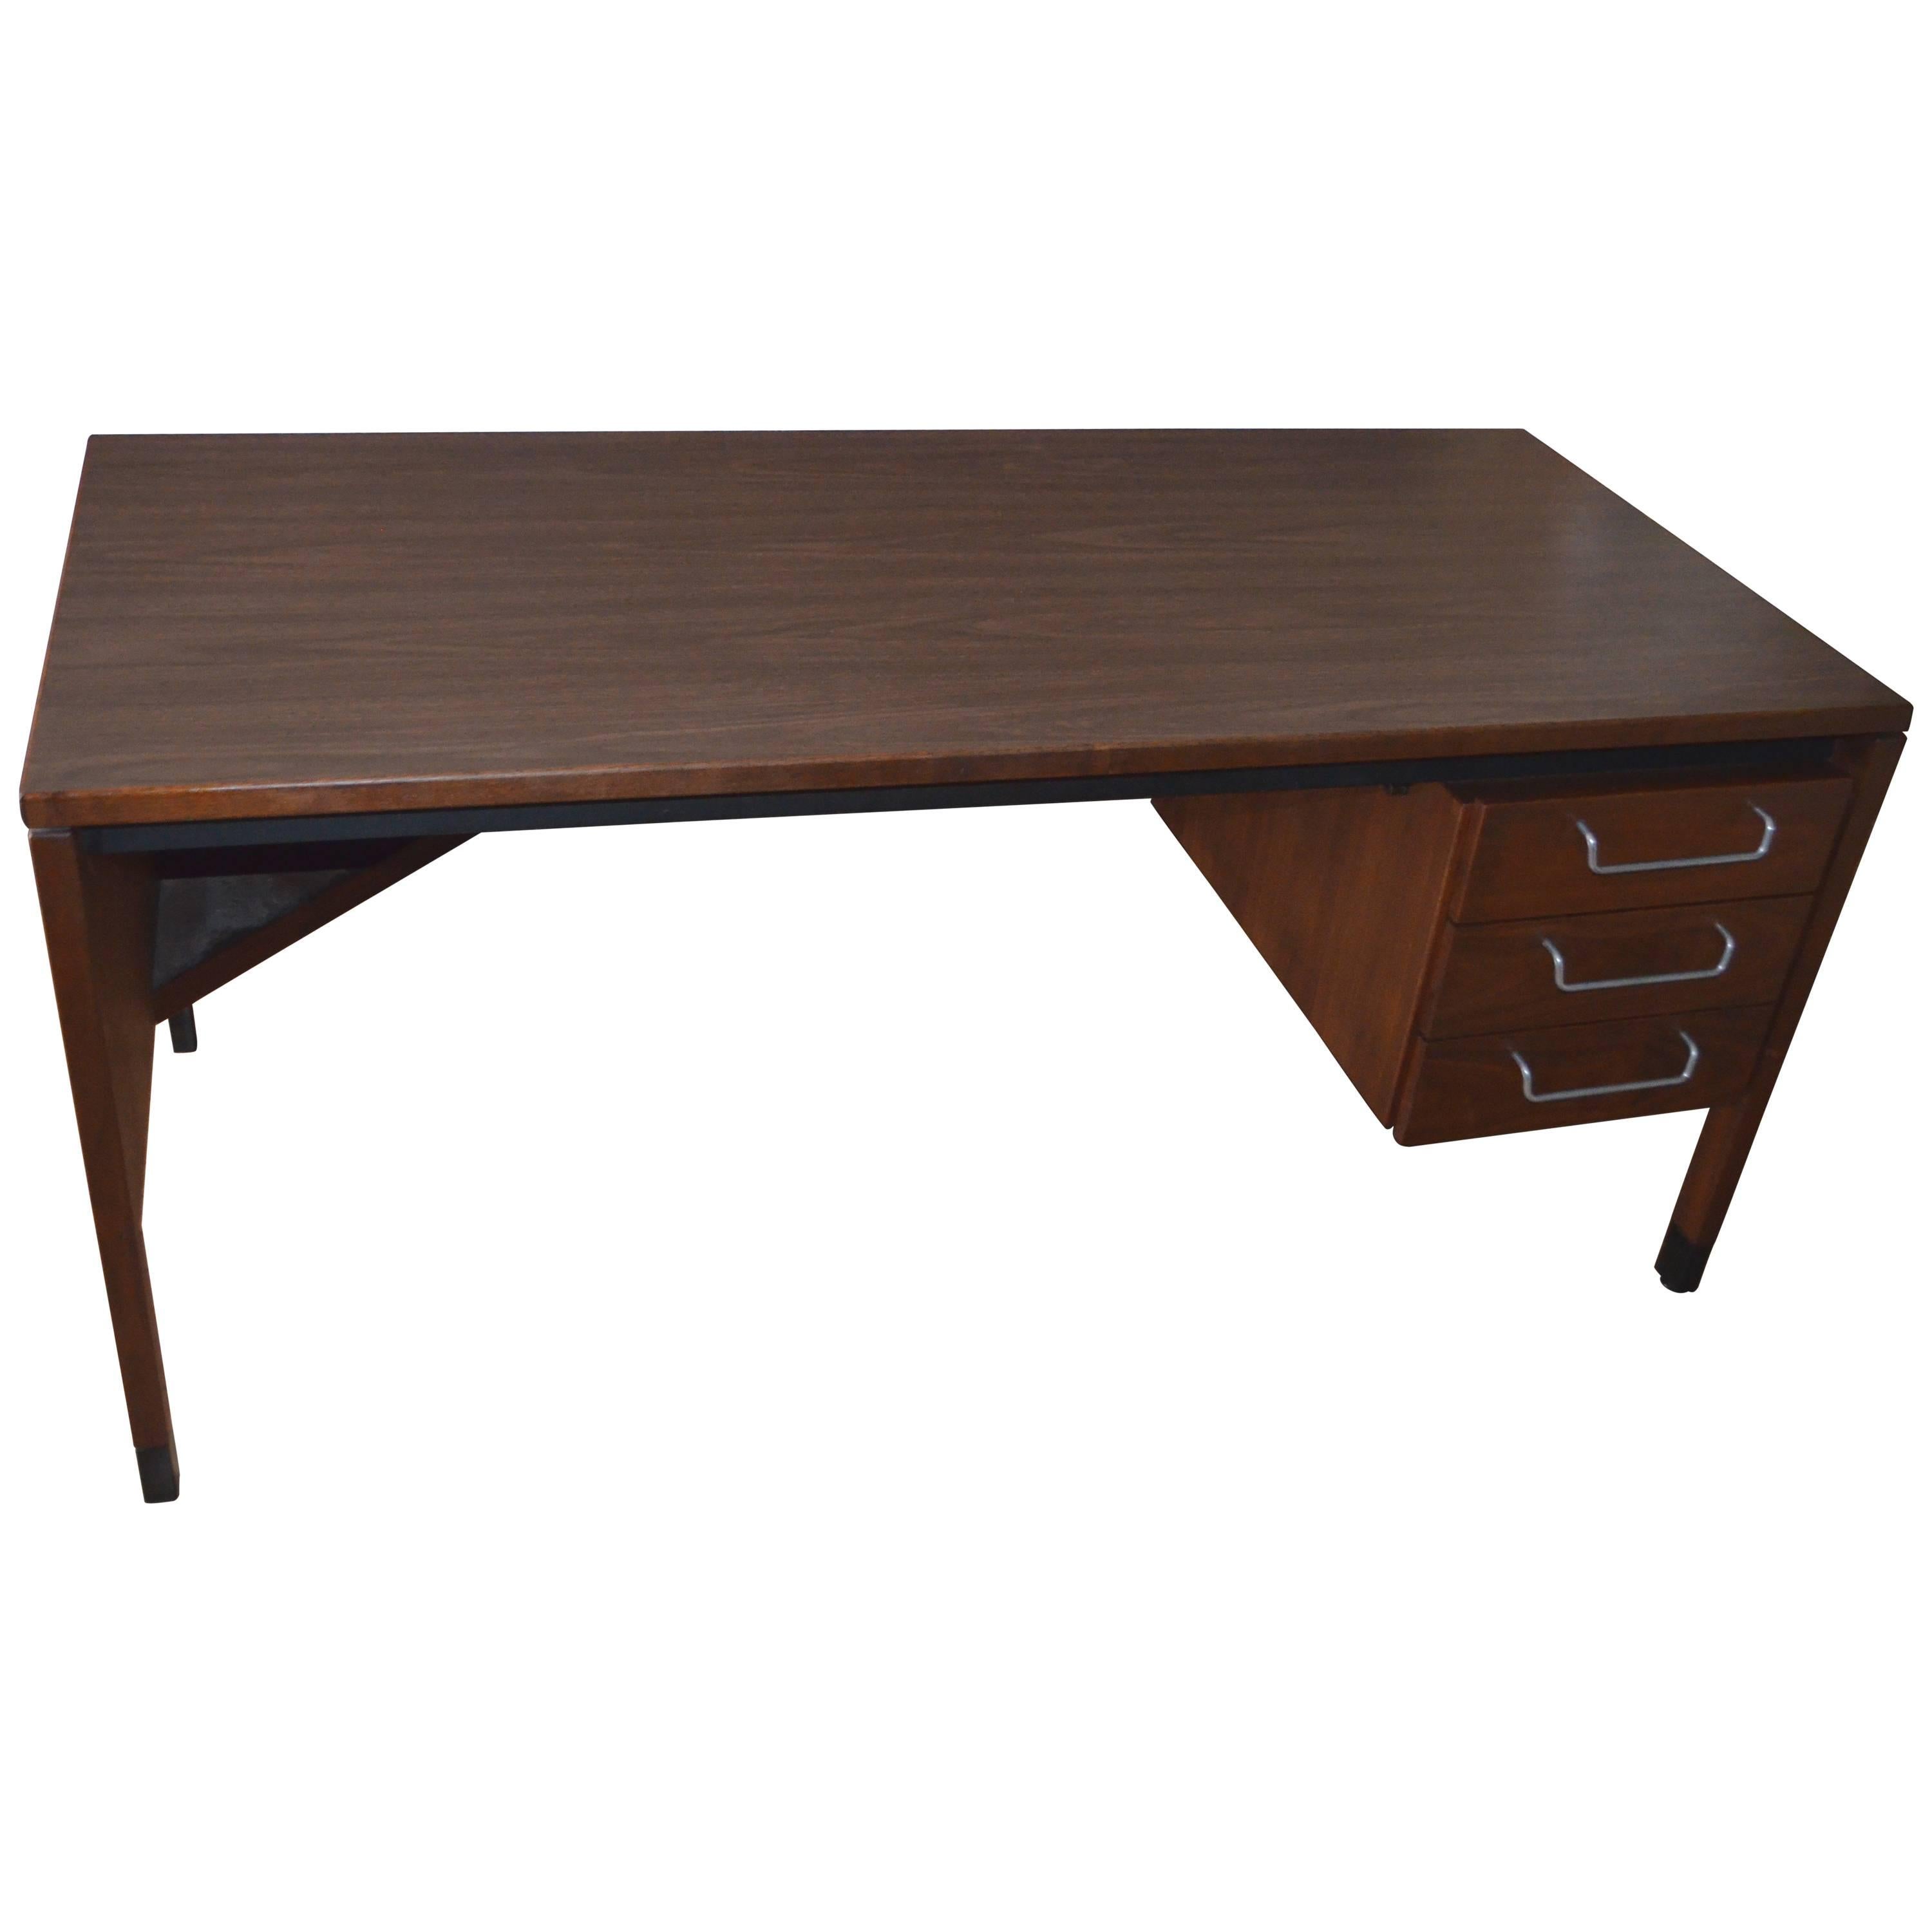 Midcentury Walnut Desk with Formica Top Designed by Jens Risom